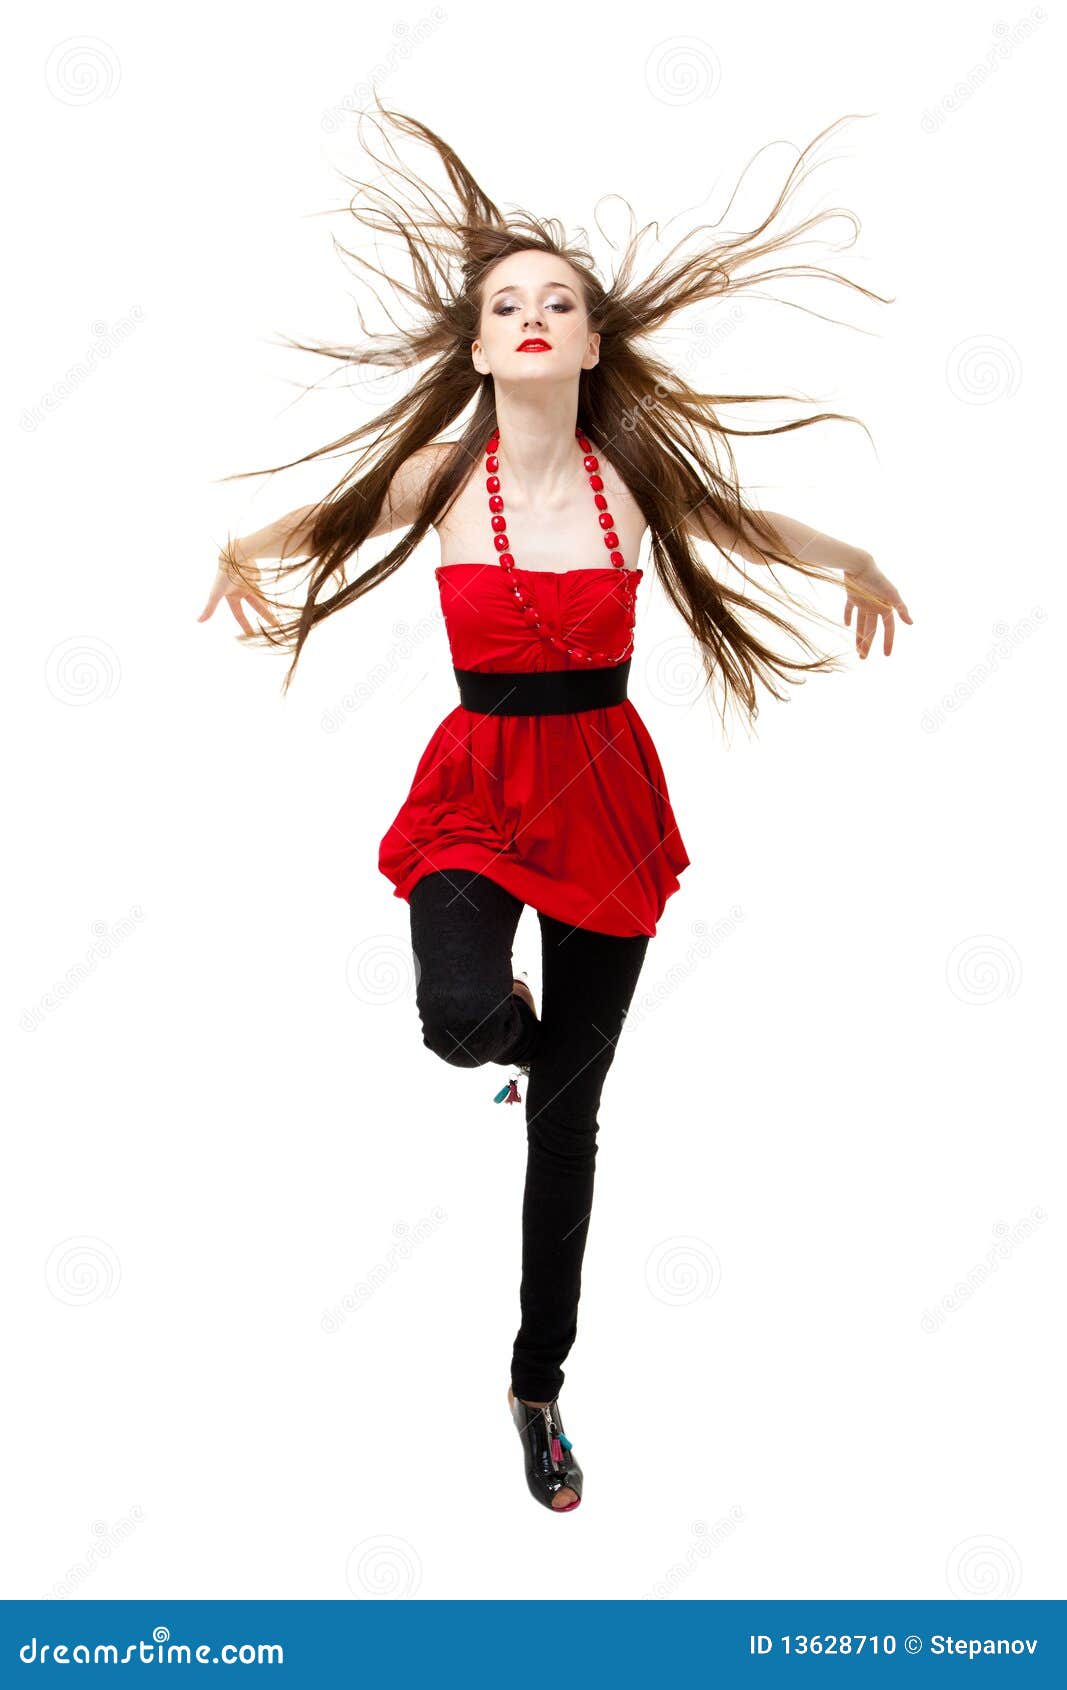 Girl with long flying hair stock photo. Image of fresh - 13628710